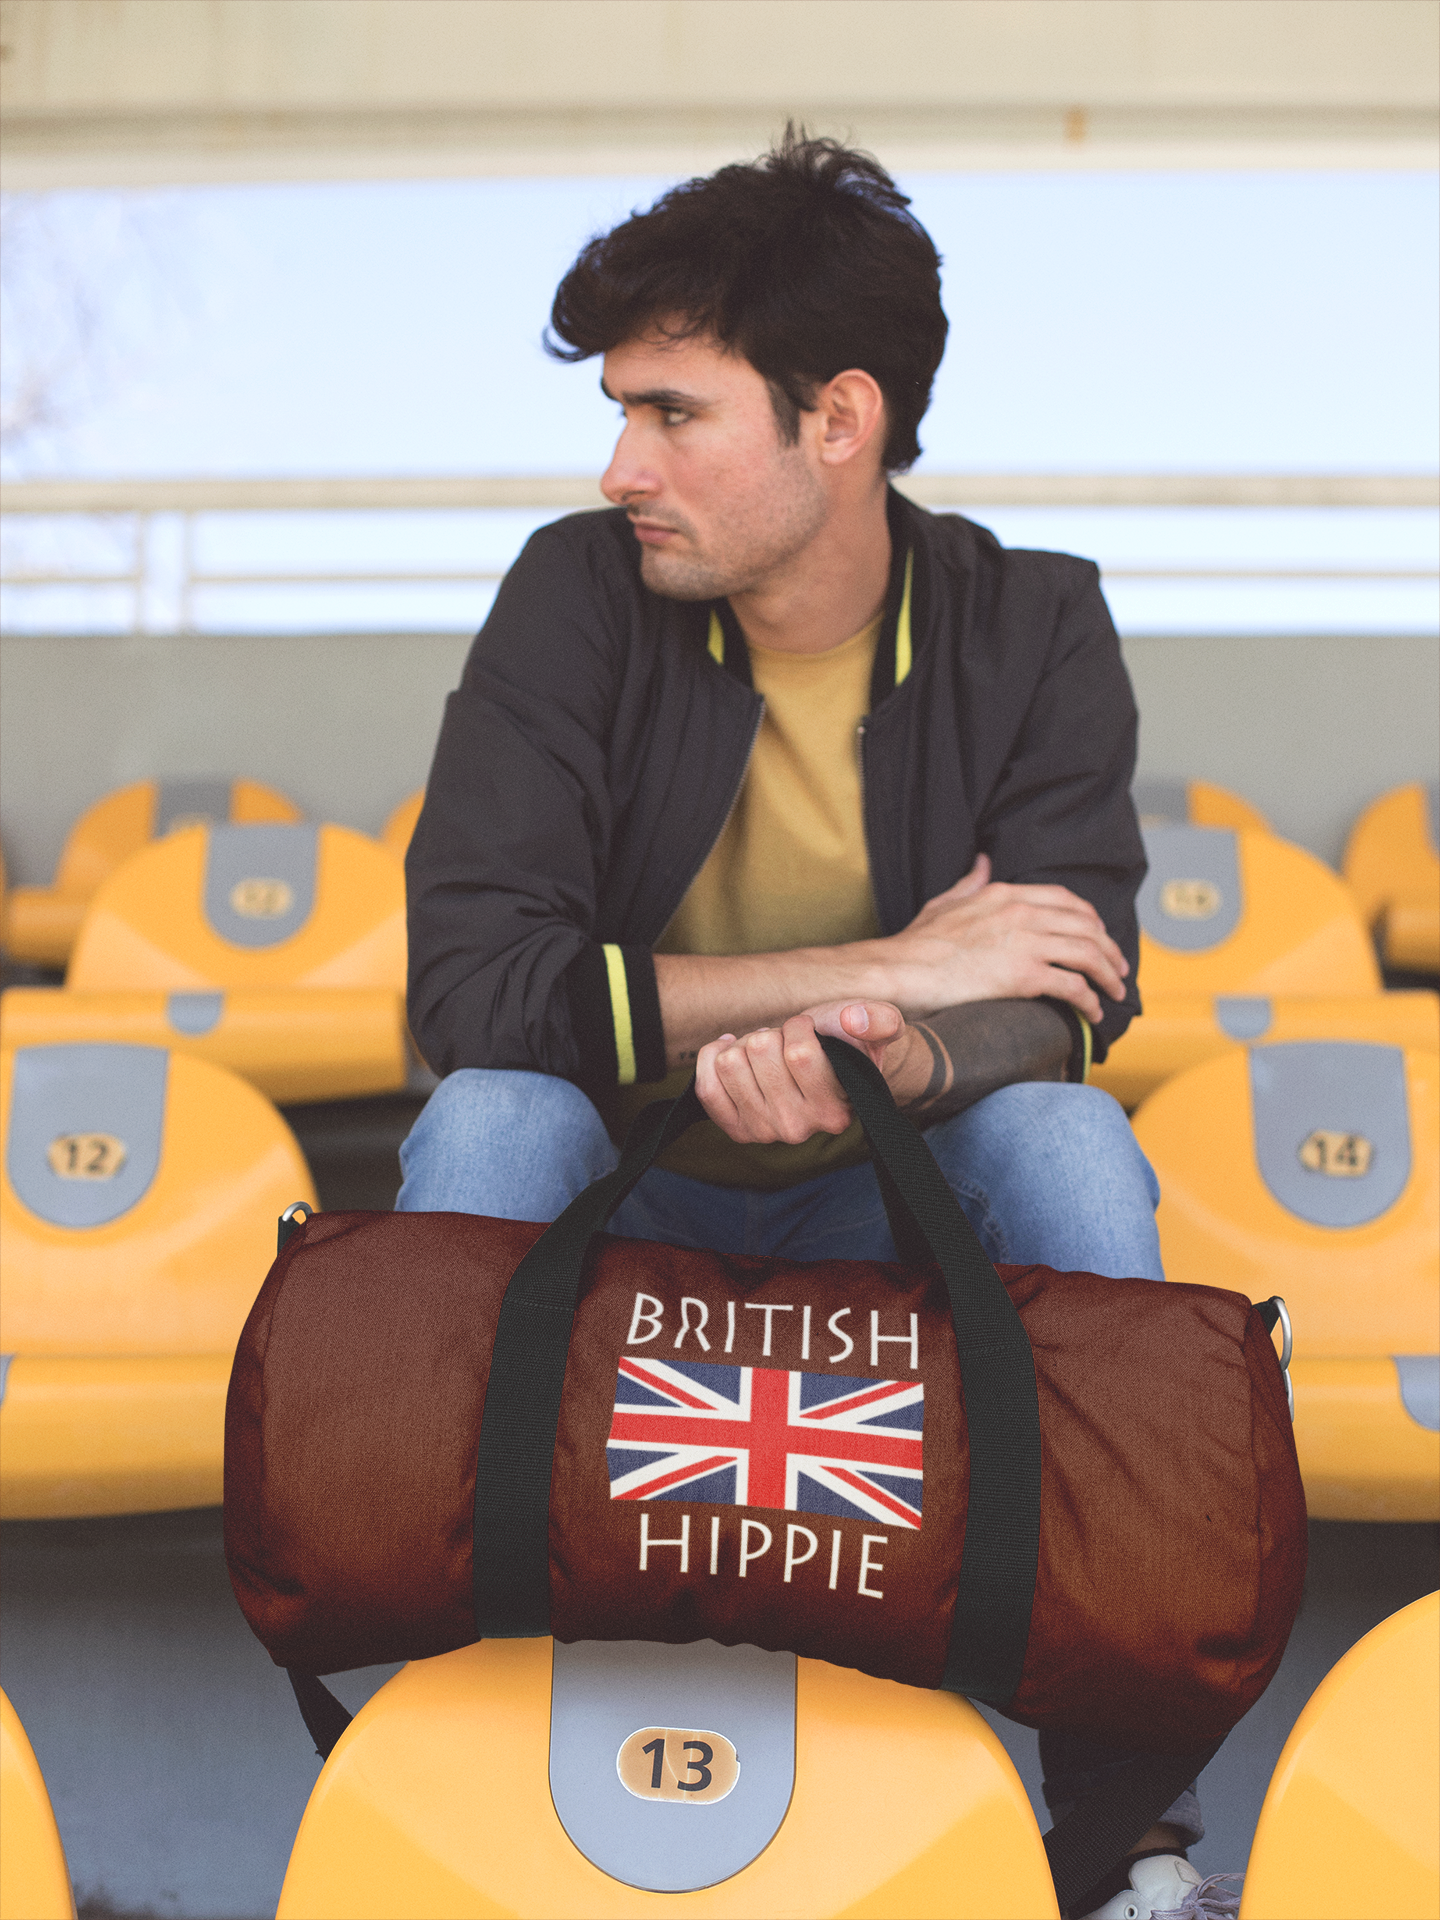  Stately Wear's British Flag Hippie duffel bag is colorful, iconic and Boho stylish. We are a Katie Couric Shop partner. This duffel bag is the perfect accessory as a beach bag, ski bag, travel bag, shopping bag & gym bag, Pilates bag or yoga bag. Custom made one-at-a-time with environmentally friendly biodegradable inks & dyes. 2 sizes to choose. Stately Wear's bags are very durable, soft and colorful duffel bags. Stately Wear's flag hippie bags also have durable straps.